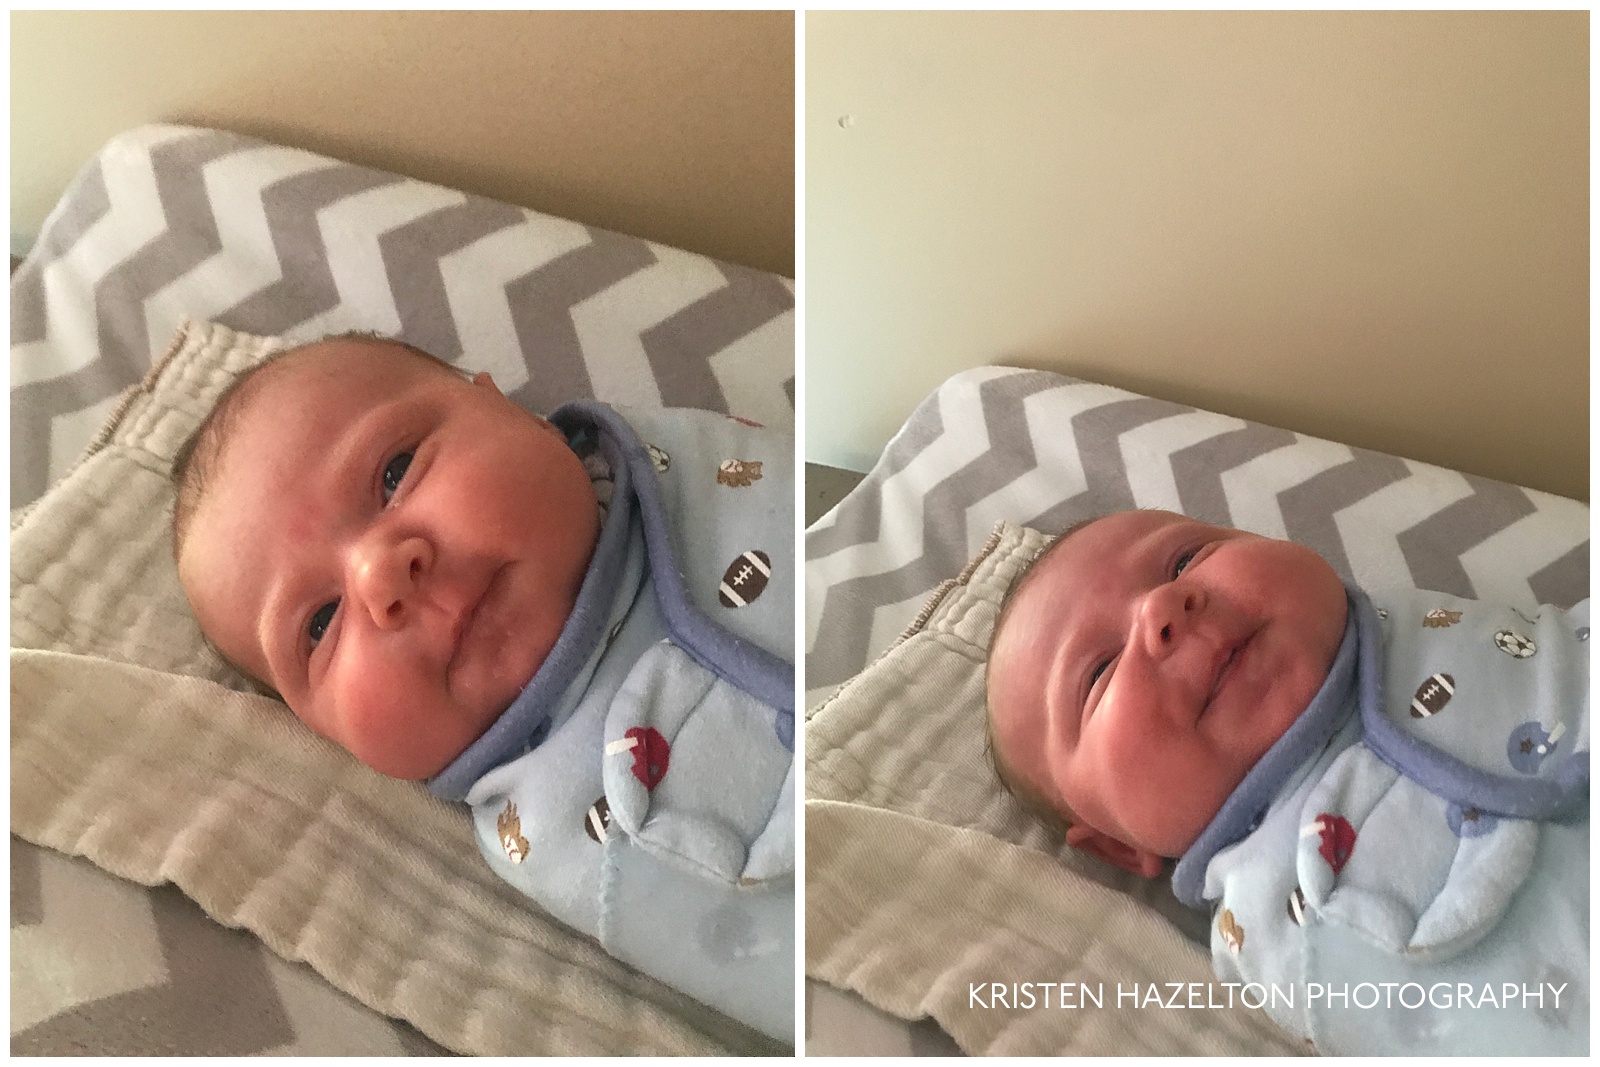 Collage of a smiling, swaddled baby